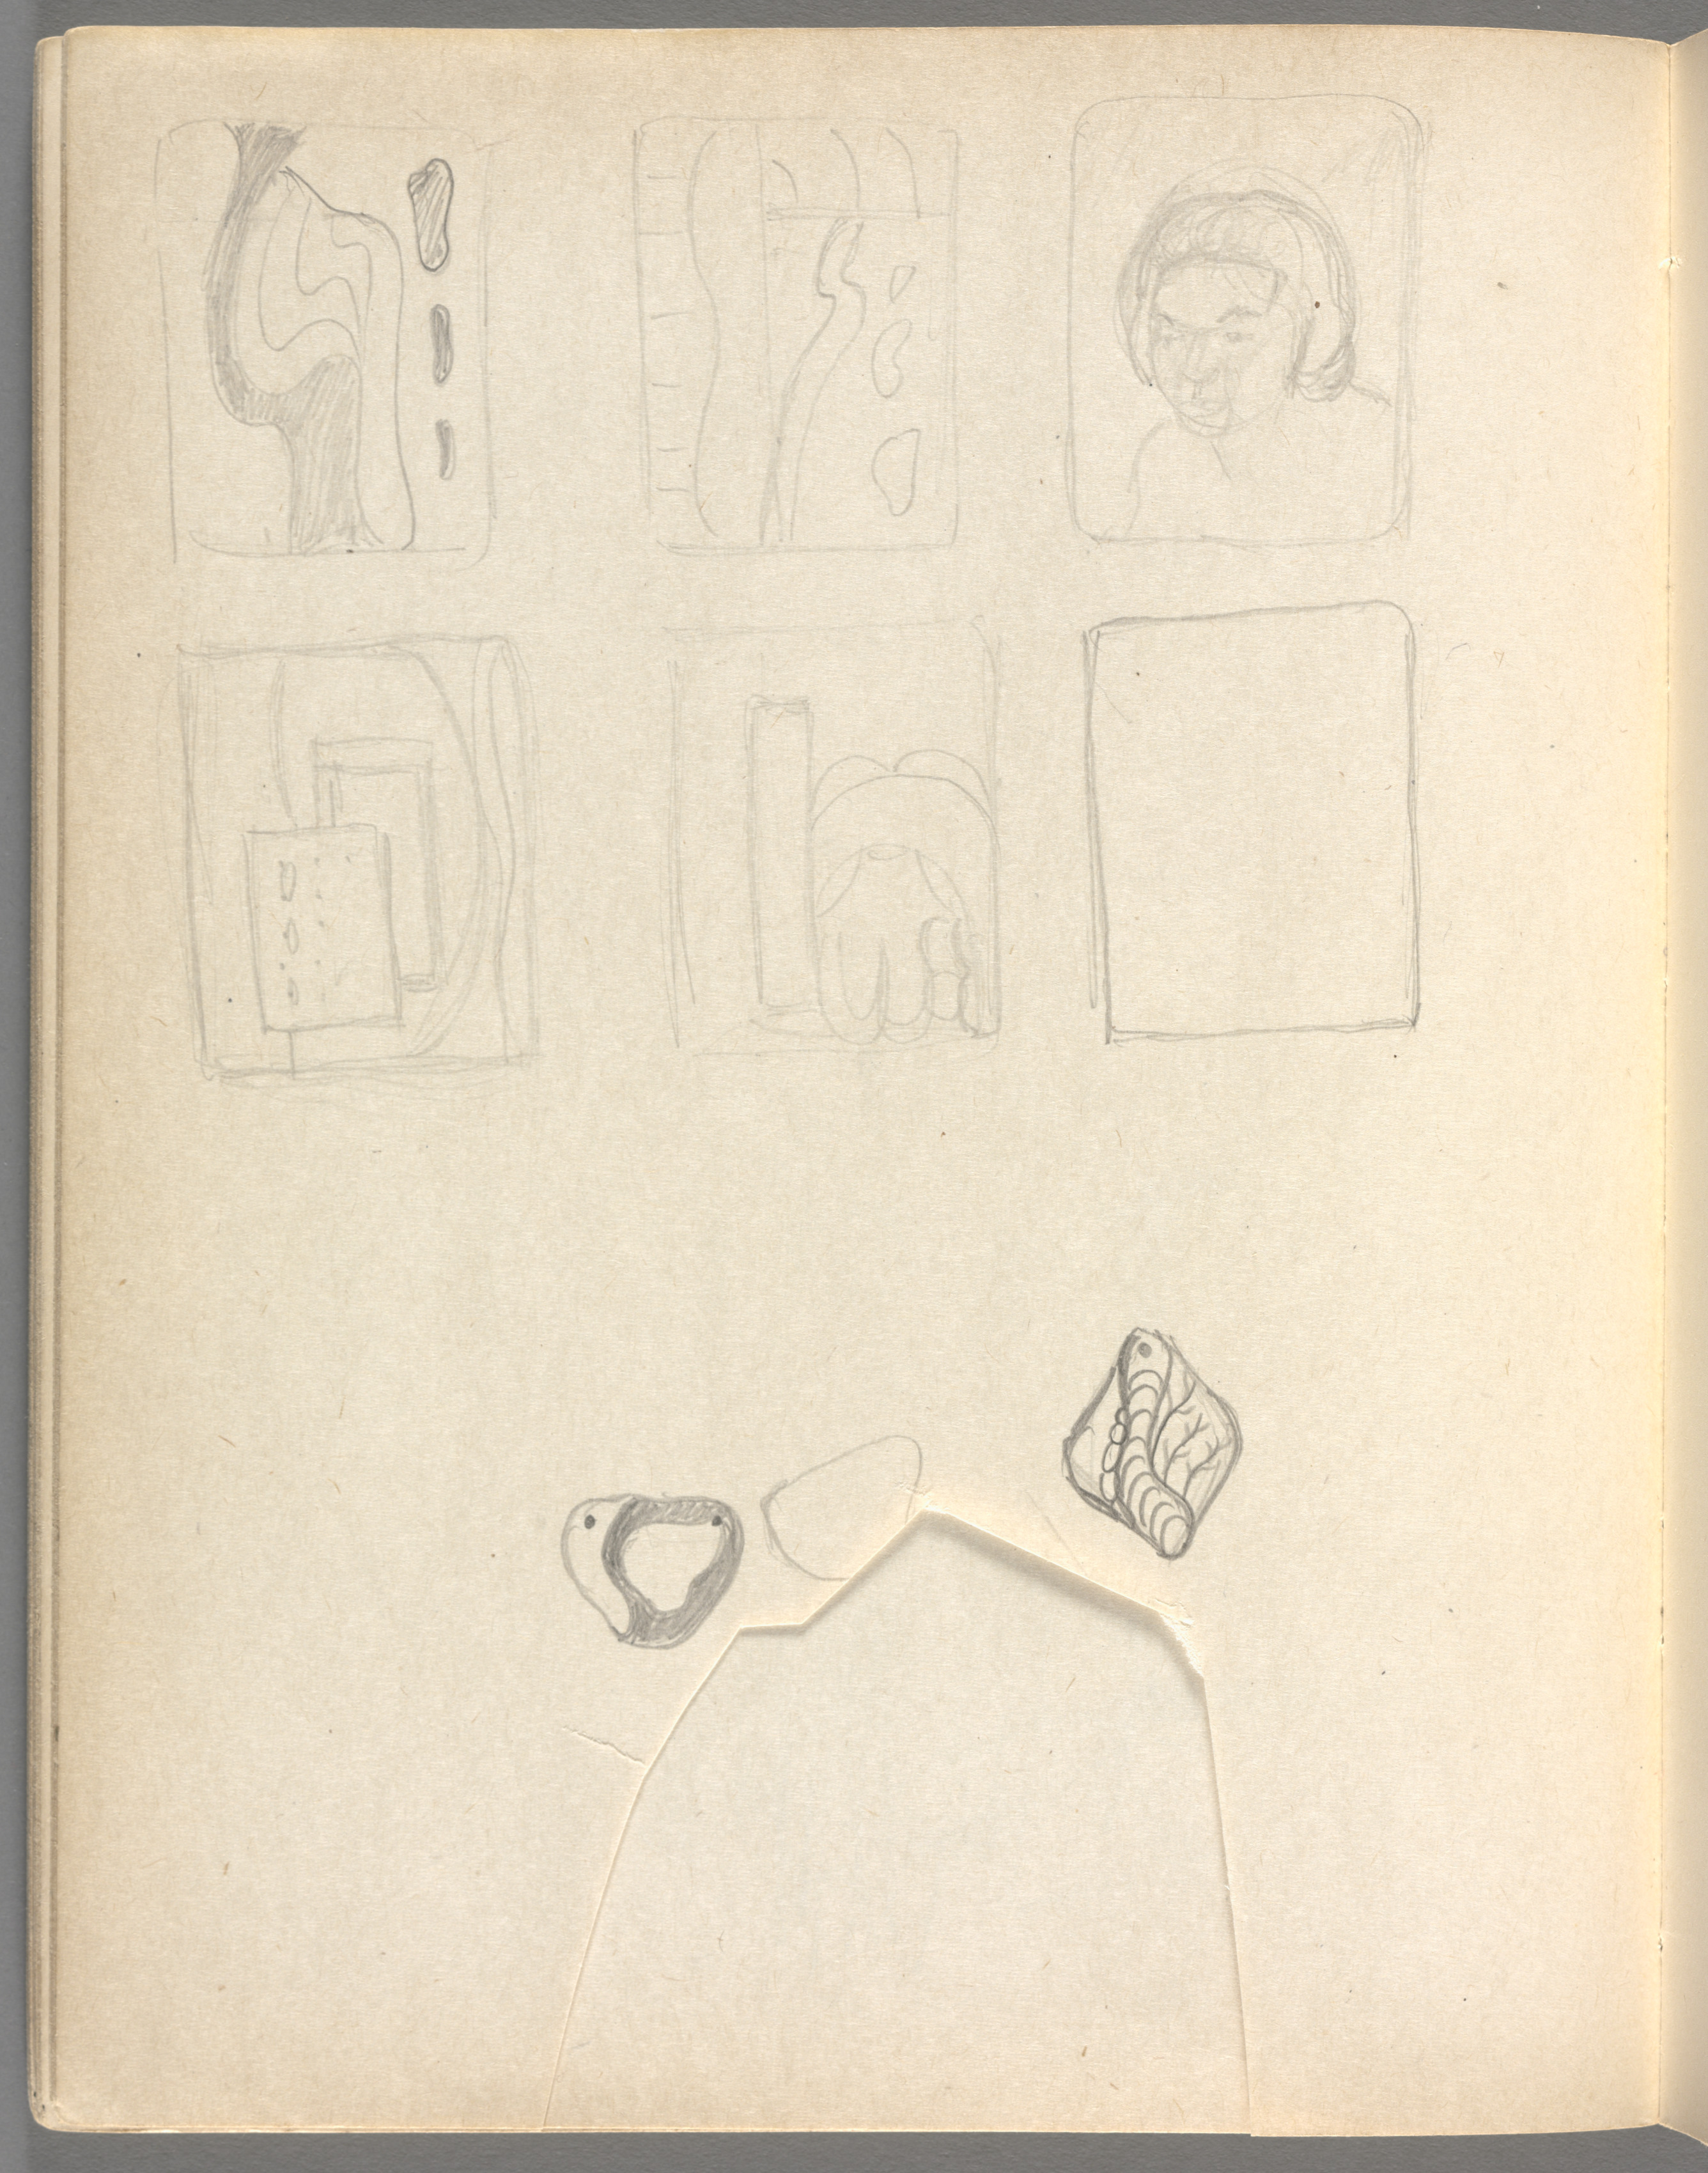 Sketchbook No. 6, page 86: Pencil 6 rectangles with designs for enamels